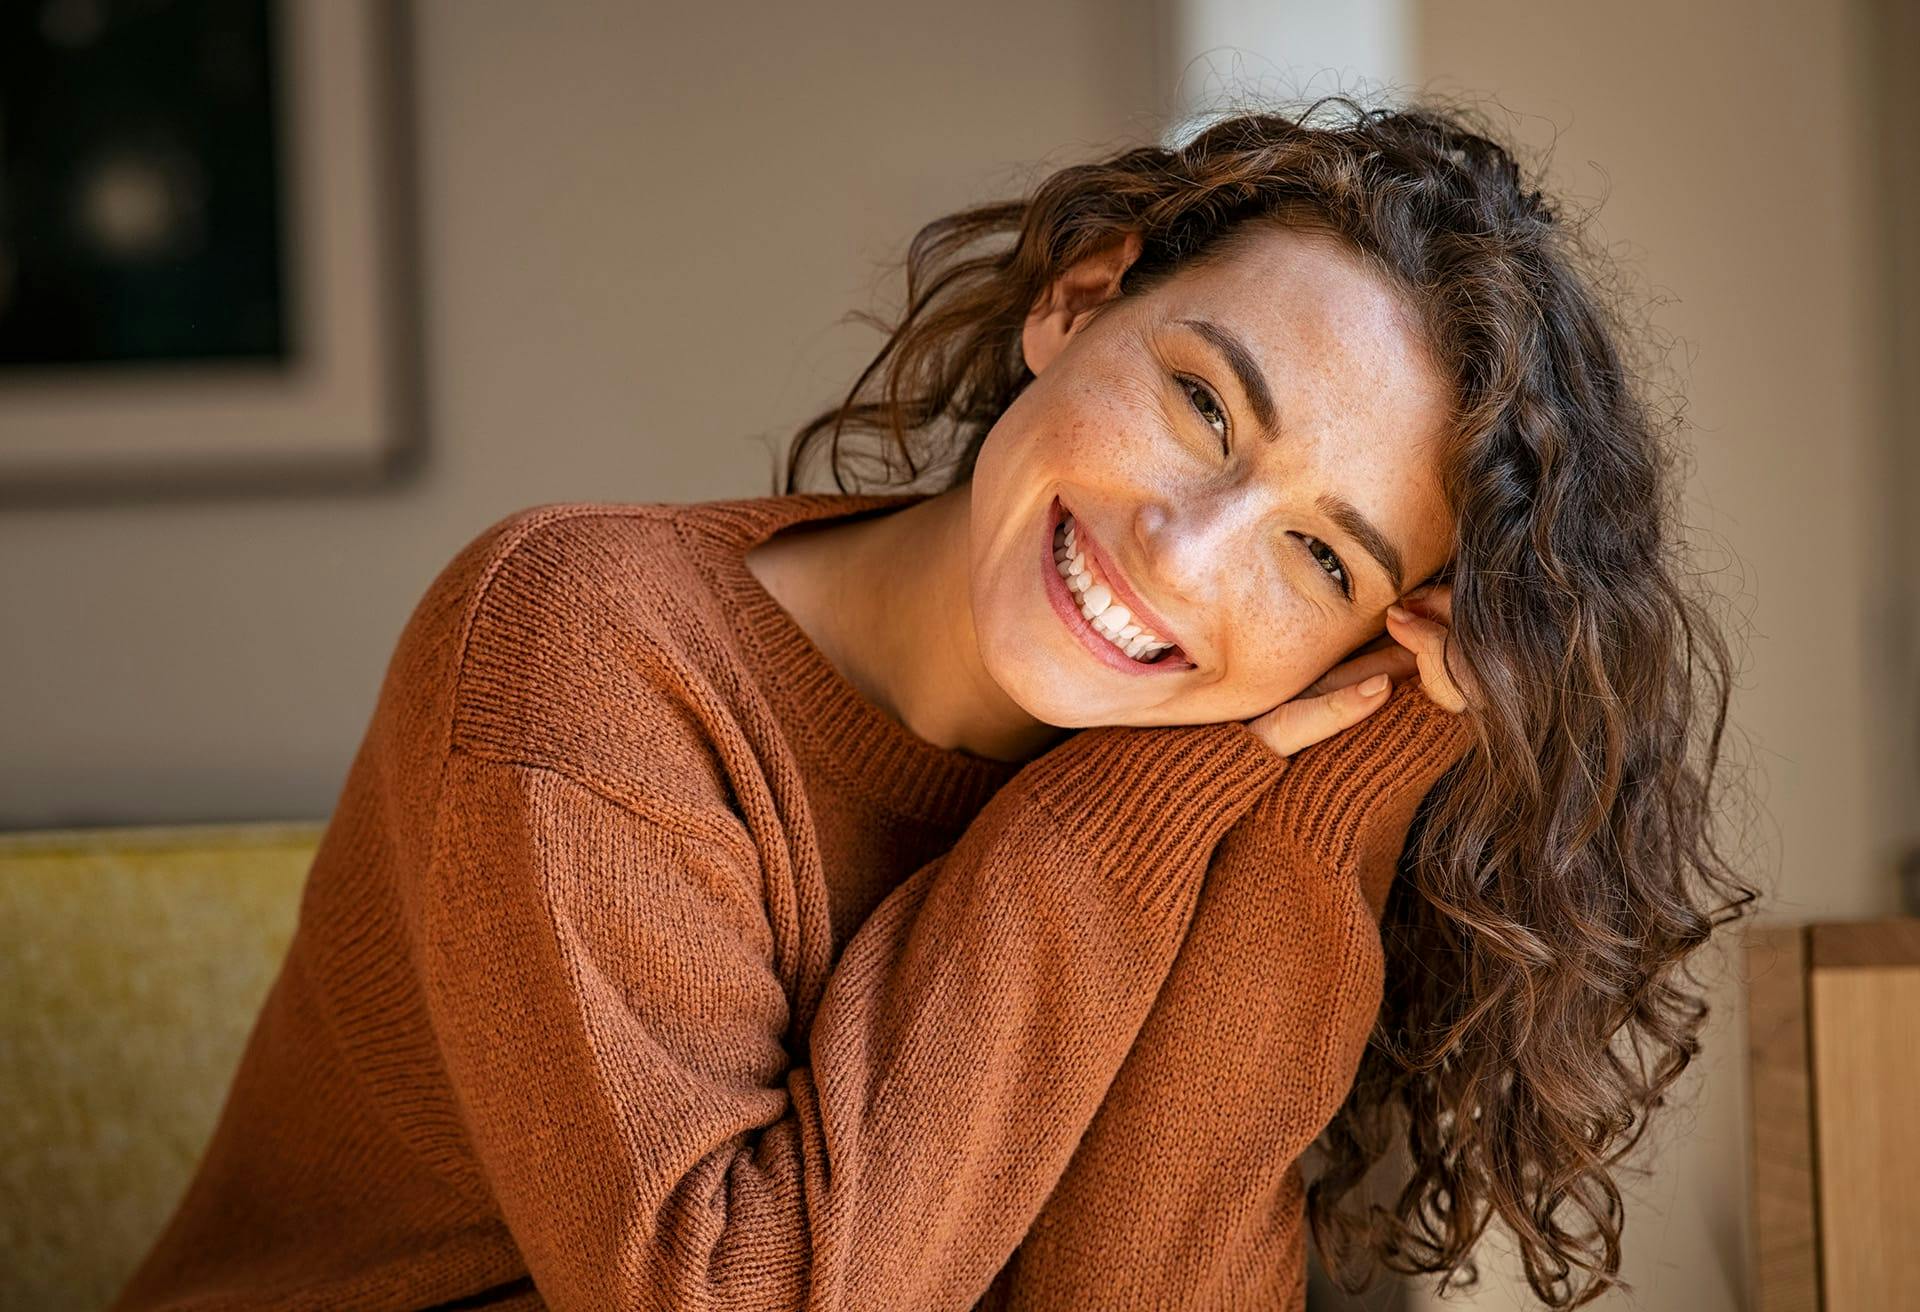 Woman smiling wearing a brown sweater